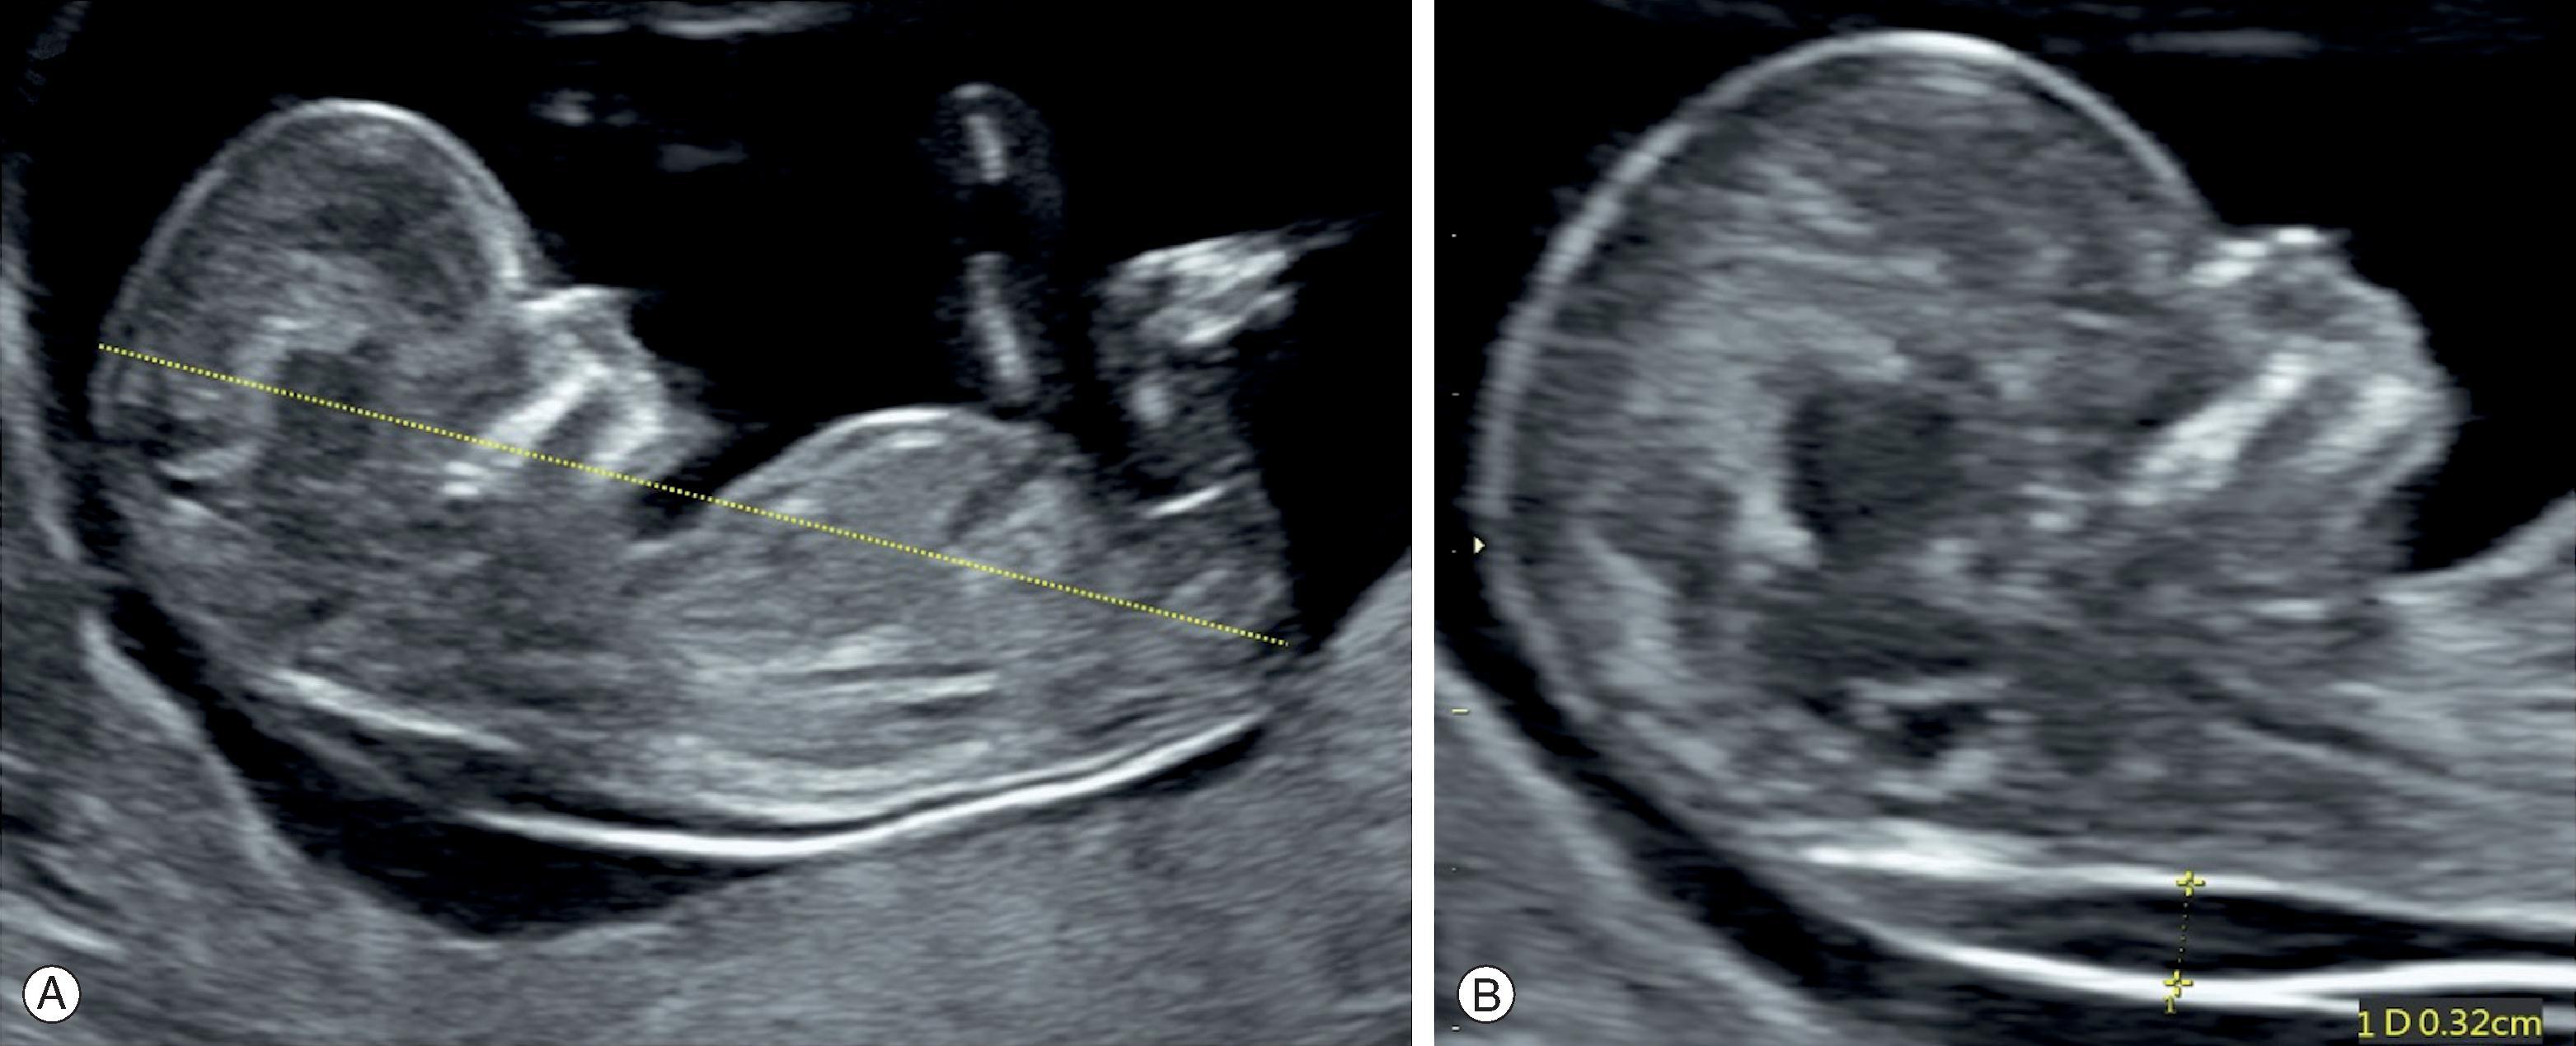 Fig. 25.1, The sagittal view required for a crown-rump length for accurate dating of gestational age (A) and to measure the nuchal translucency between the on-screen calipers (B) .